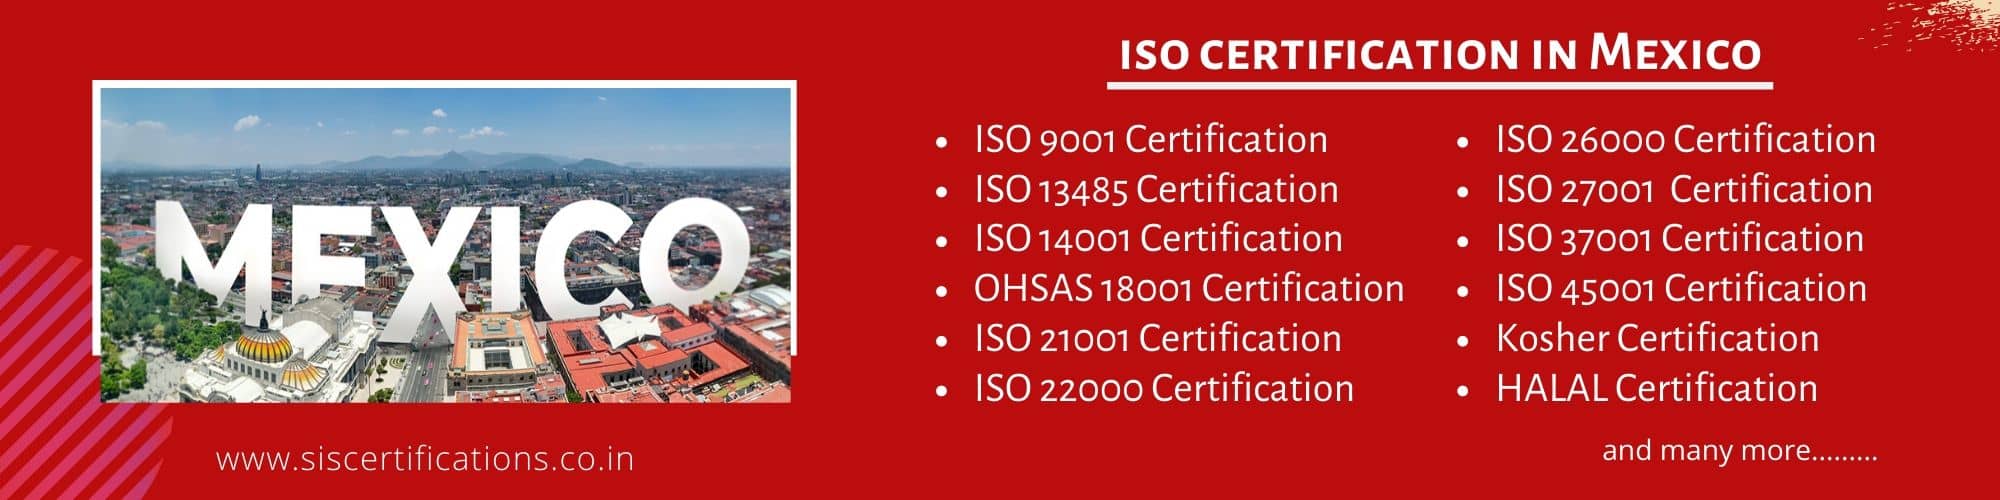 ISO Certification in Mexico